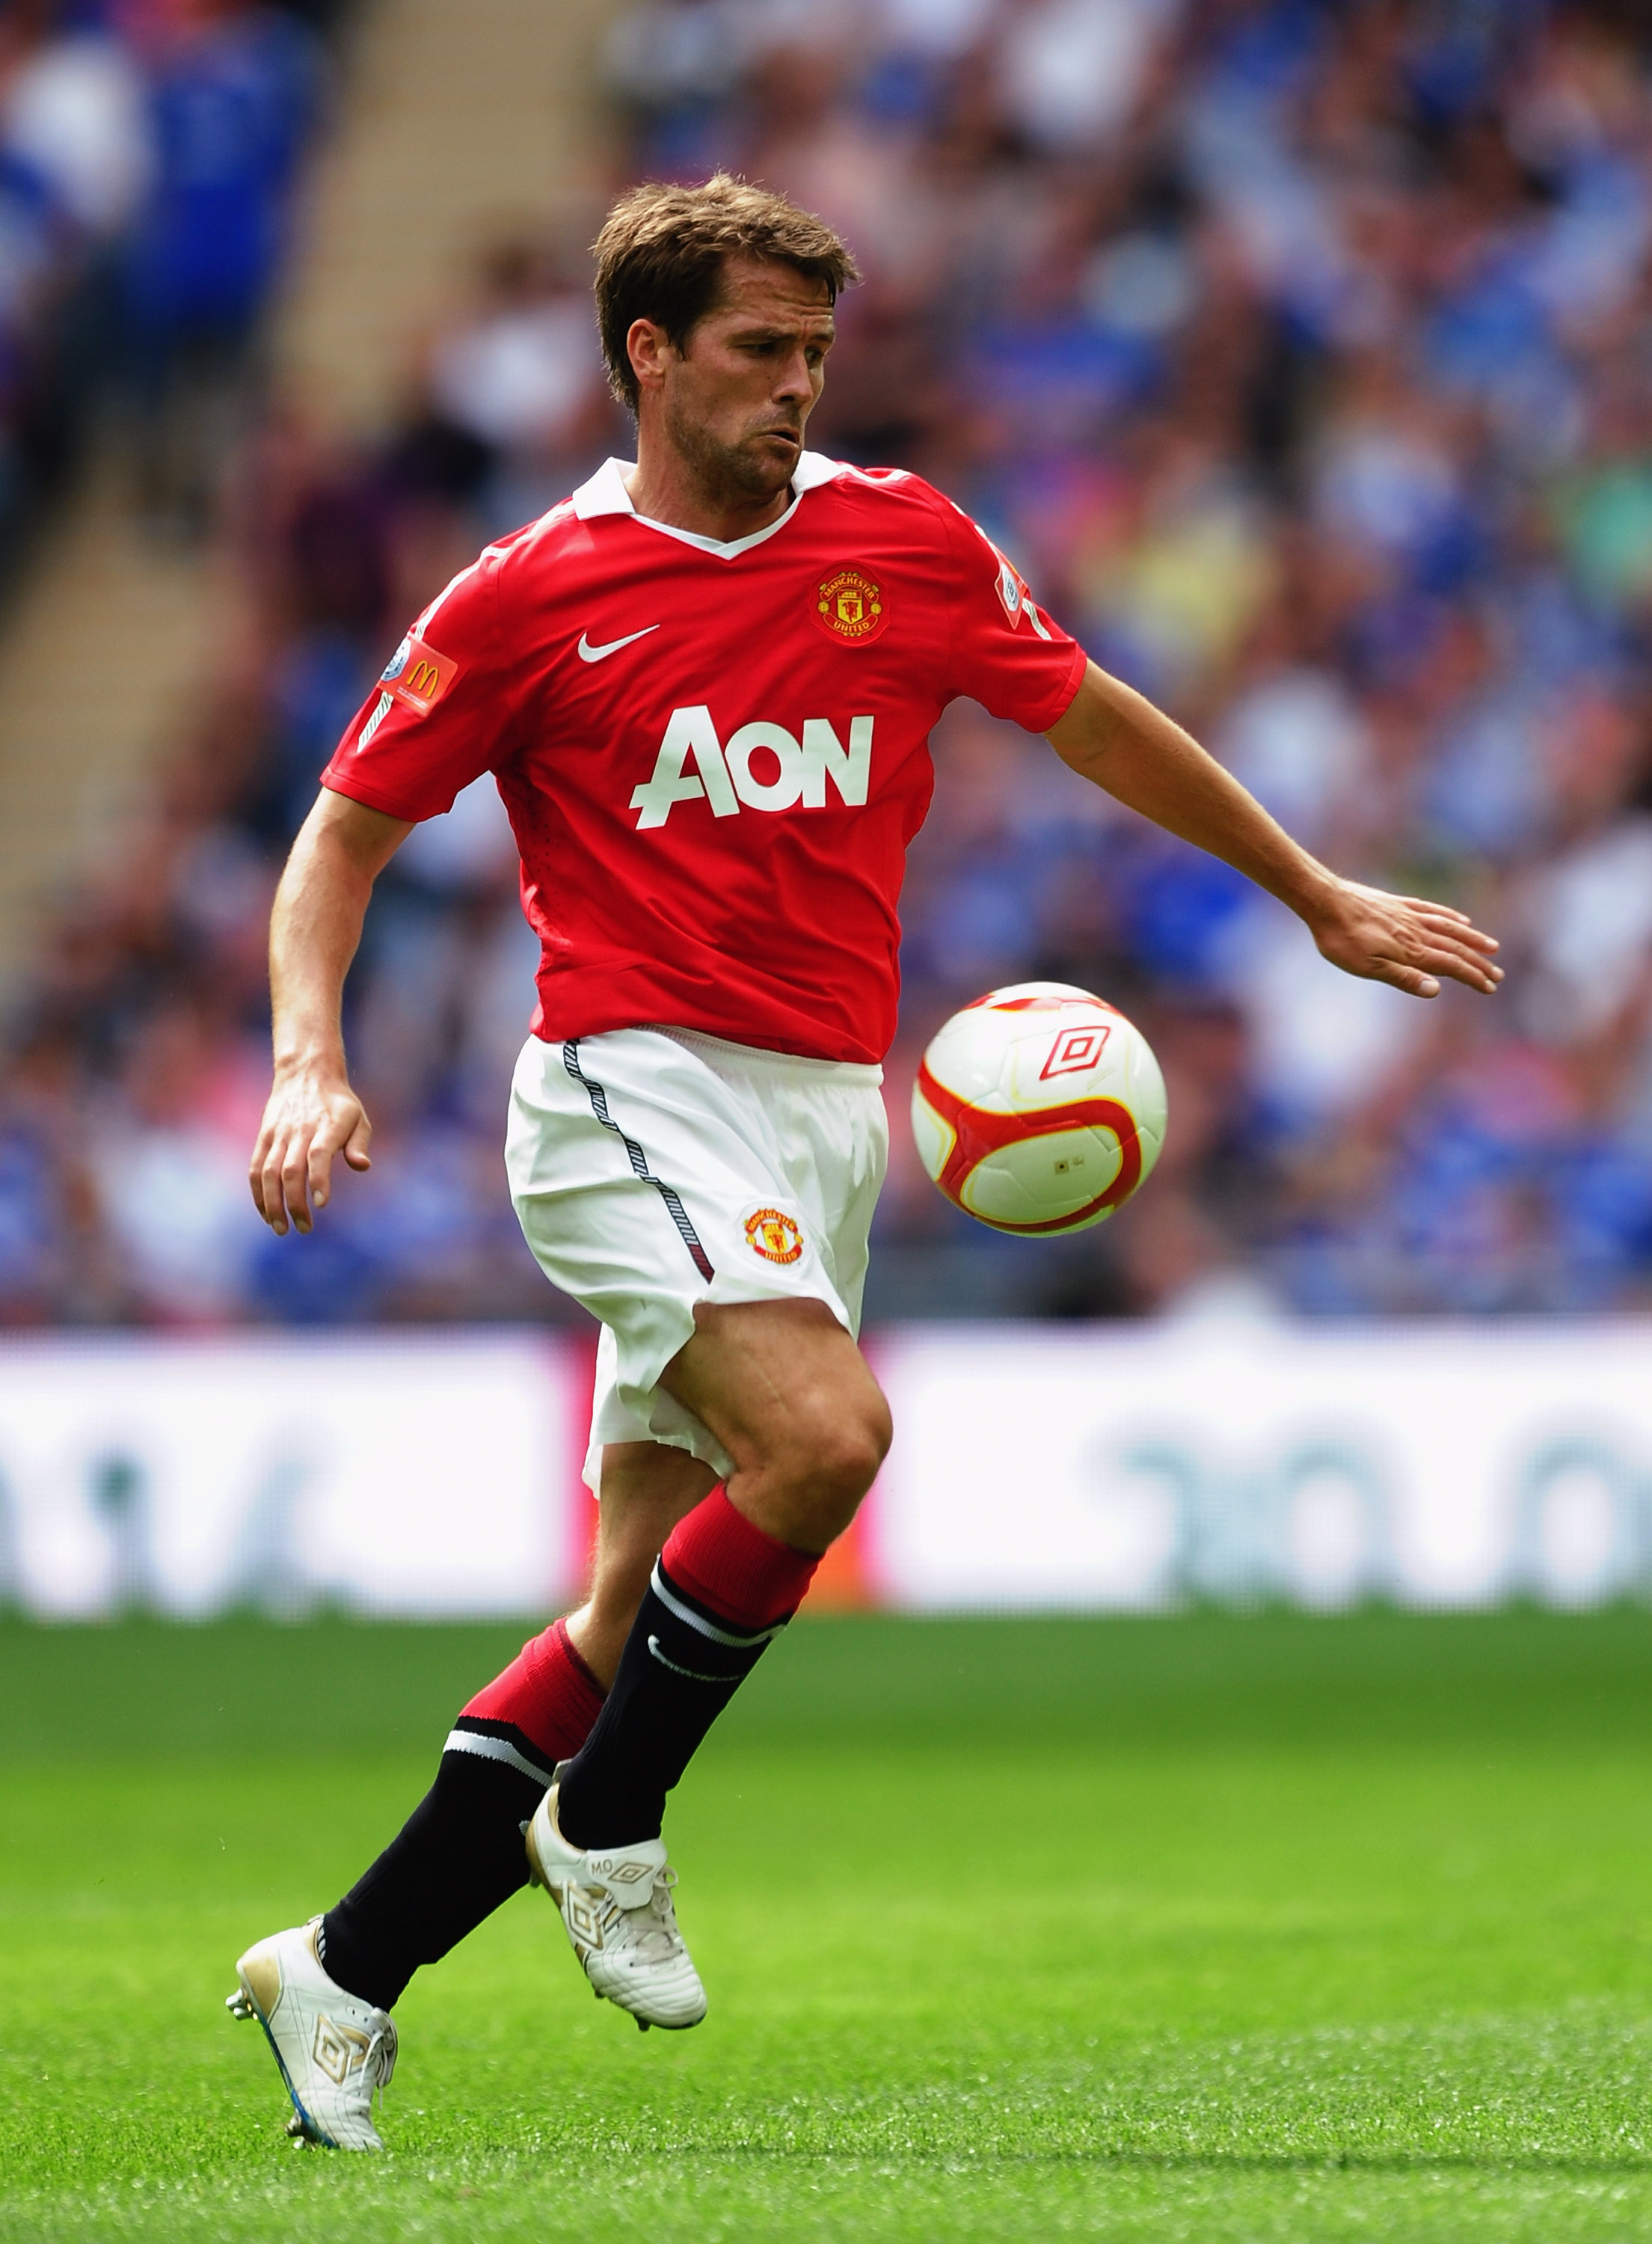 LONDON, ENGLAND - AUGUST 08:  Michael Owen of Manchester United in action during the FA Community Shield match between Chelsea and Manchester United at Wembley Stadium on August 8, 2010 in London, England.  (Photo by Laurence Griffiths/Getty Images)